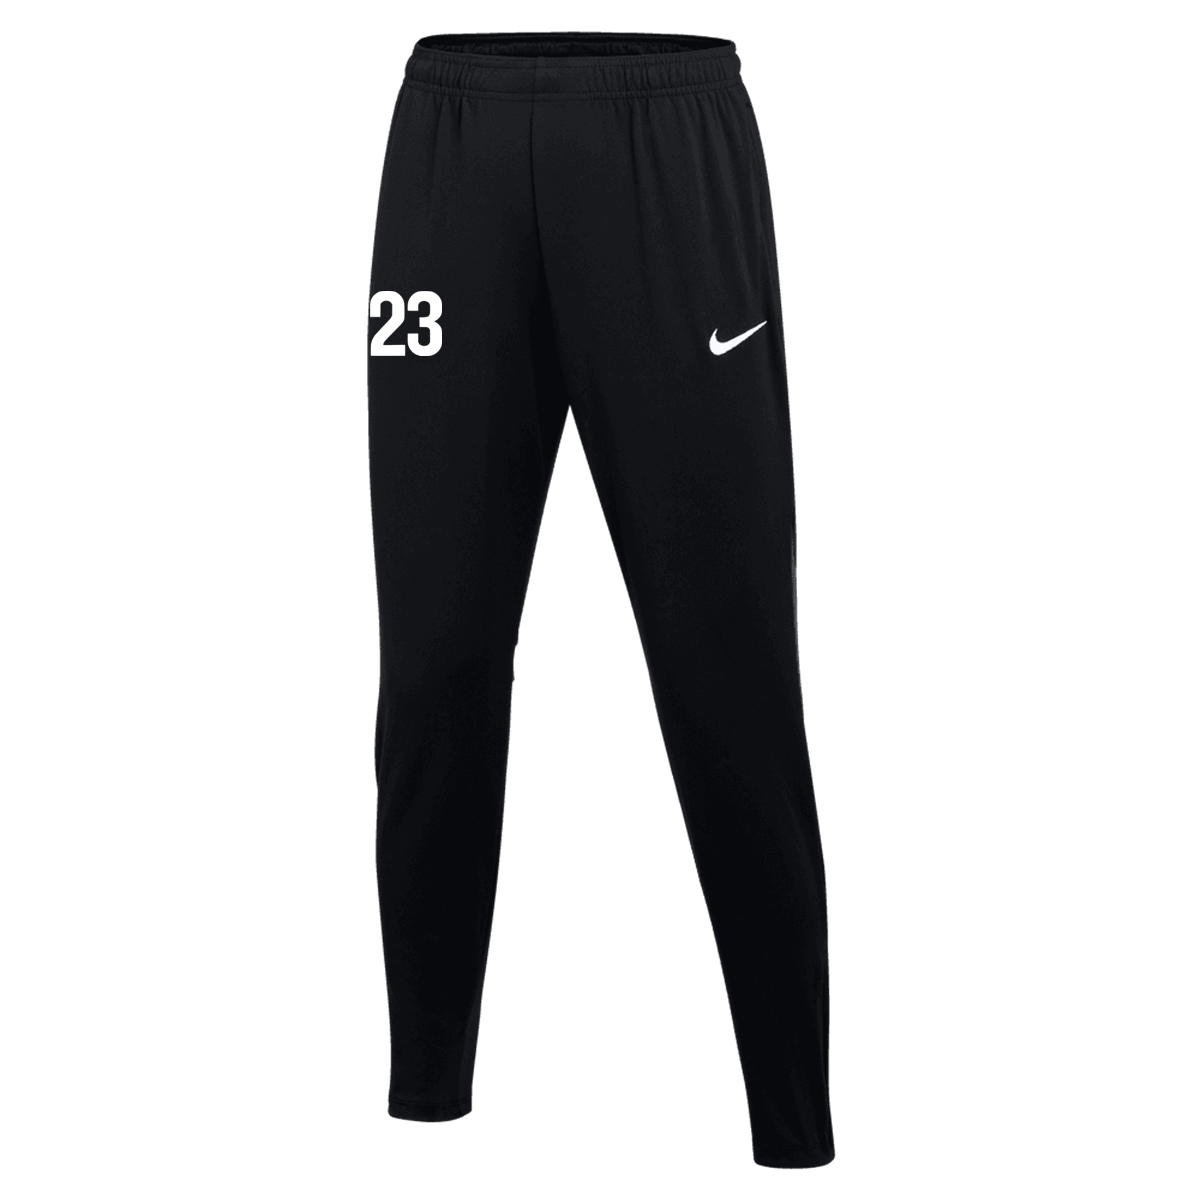 Anchorage Thorns Pants [Women's]